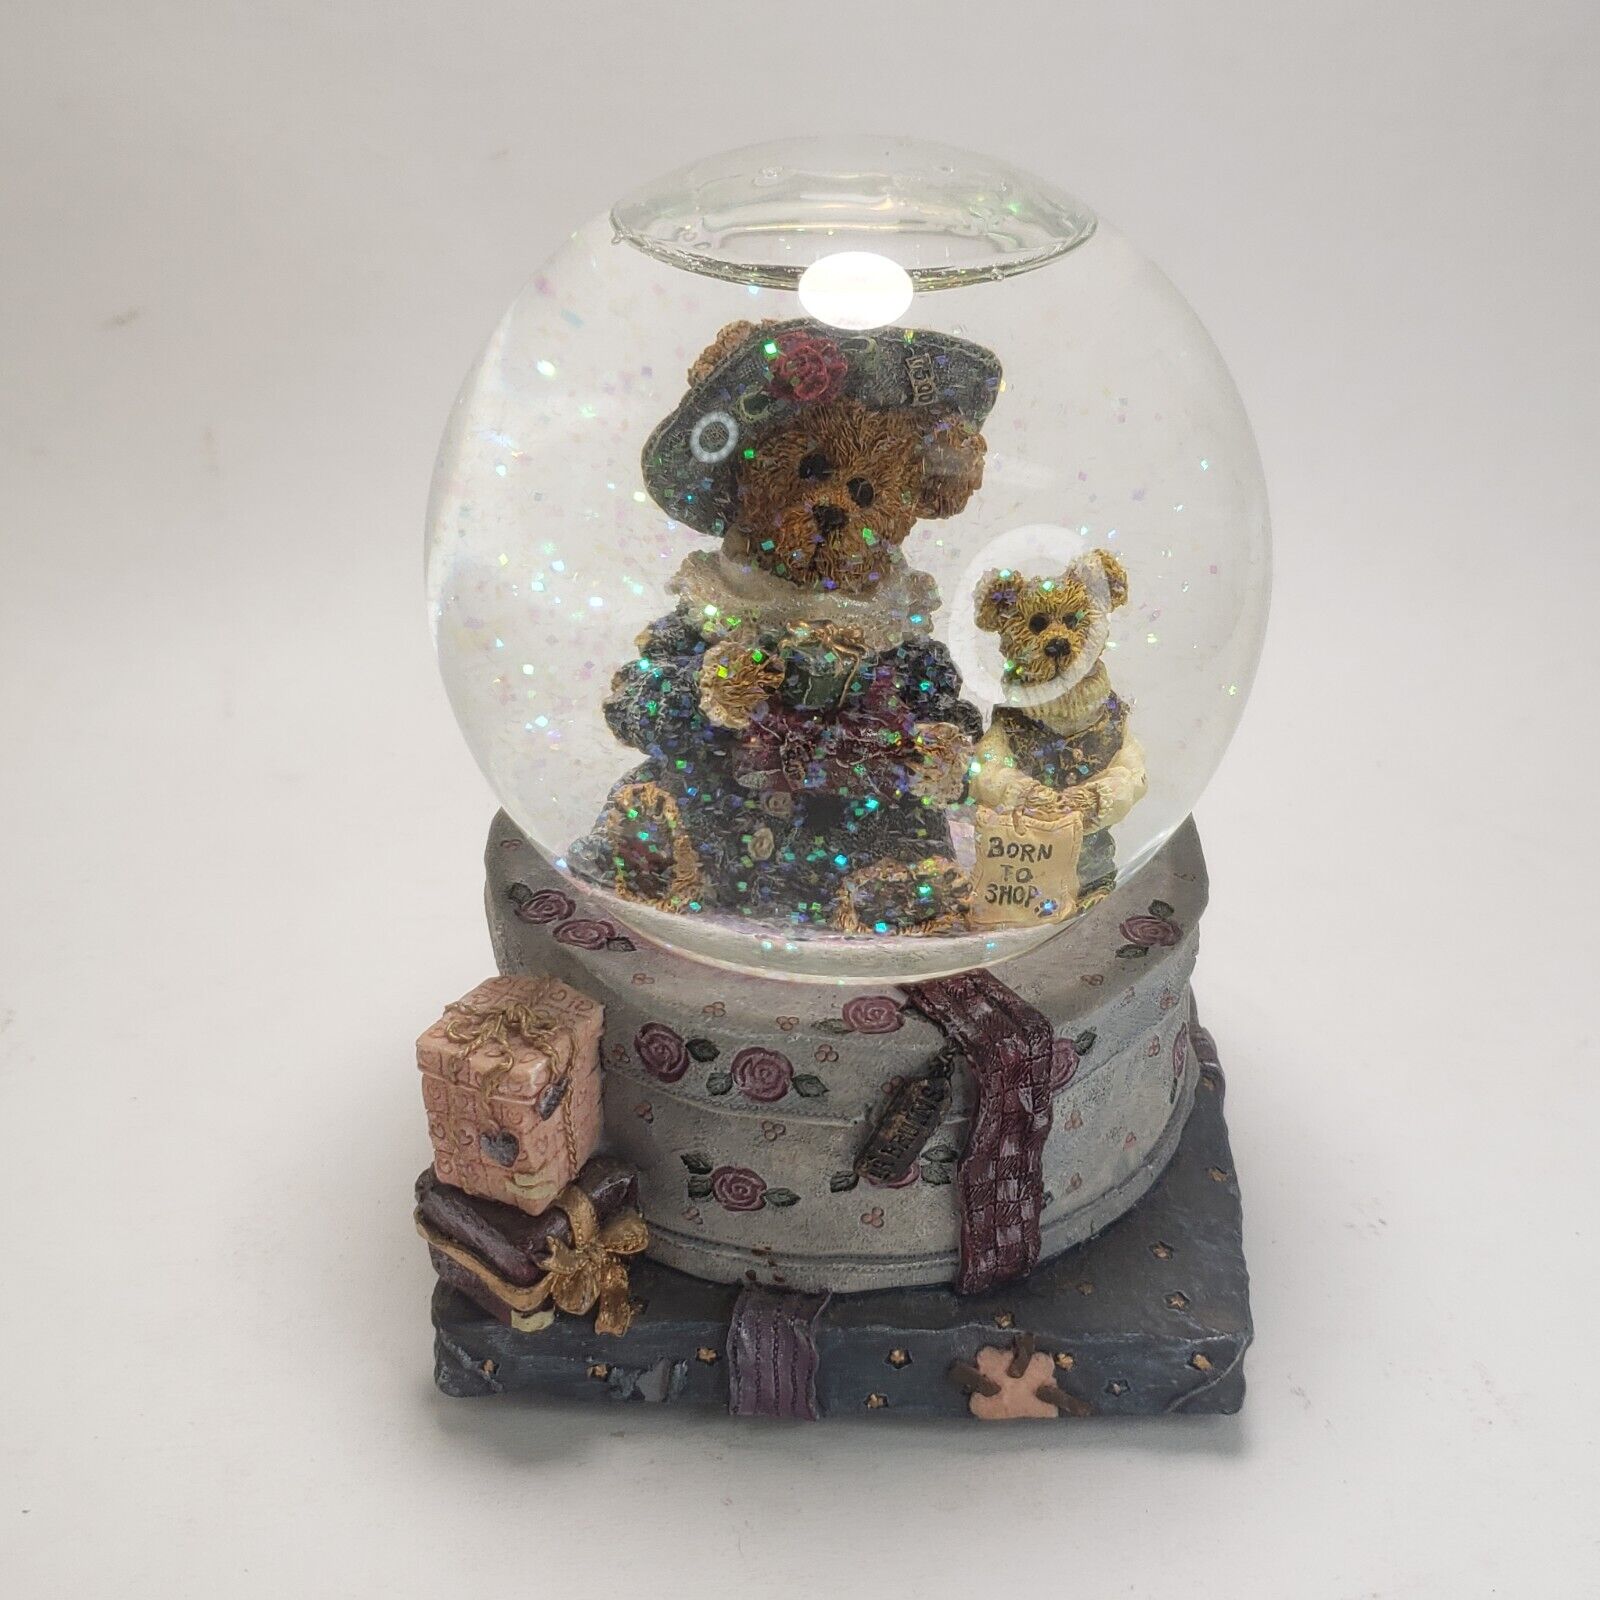 Bearstone Collectibles Boyd's Collection Waterglobe Music Box Born To Shop